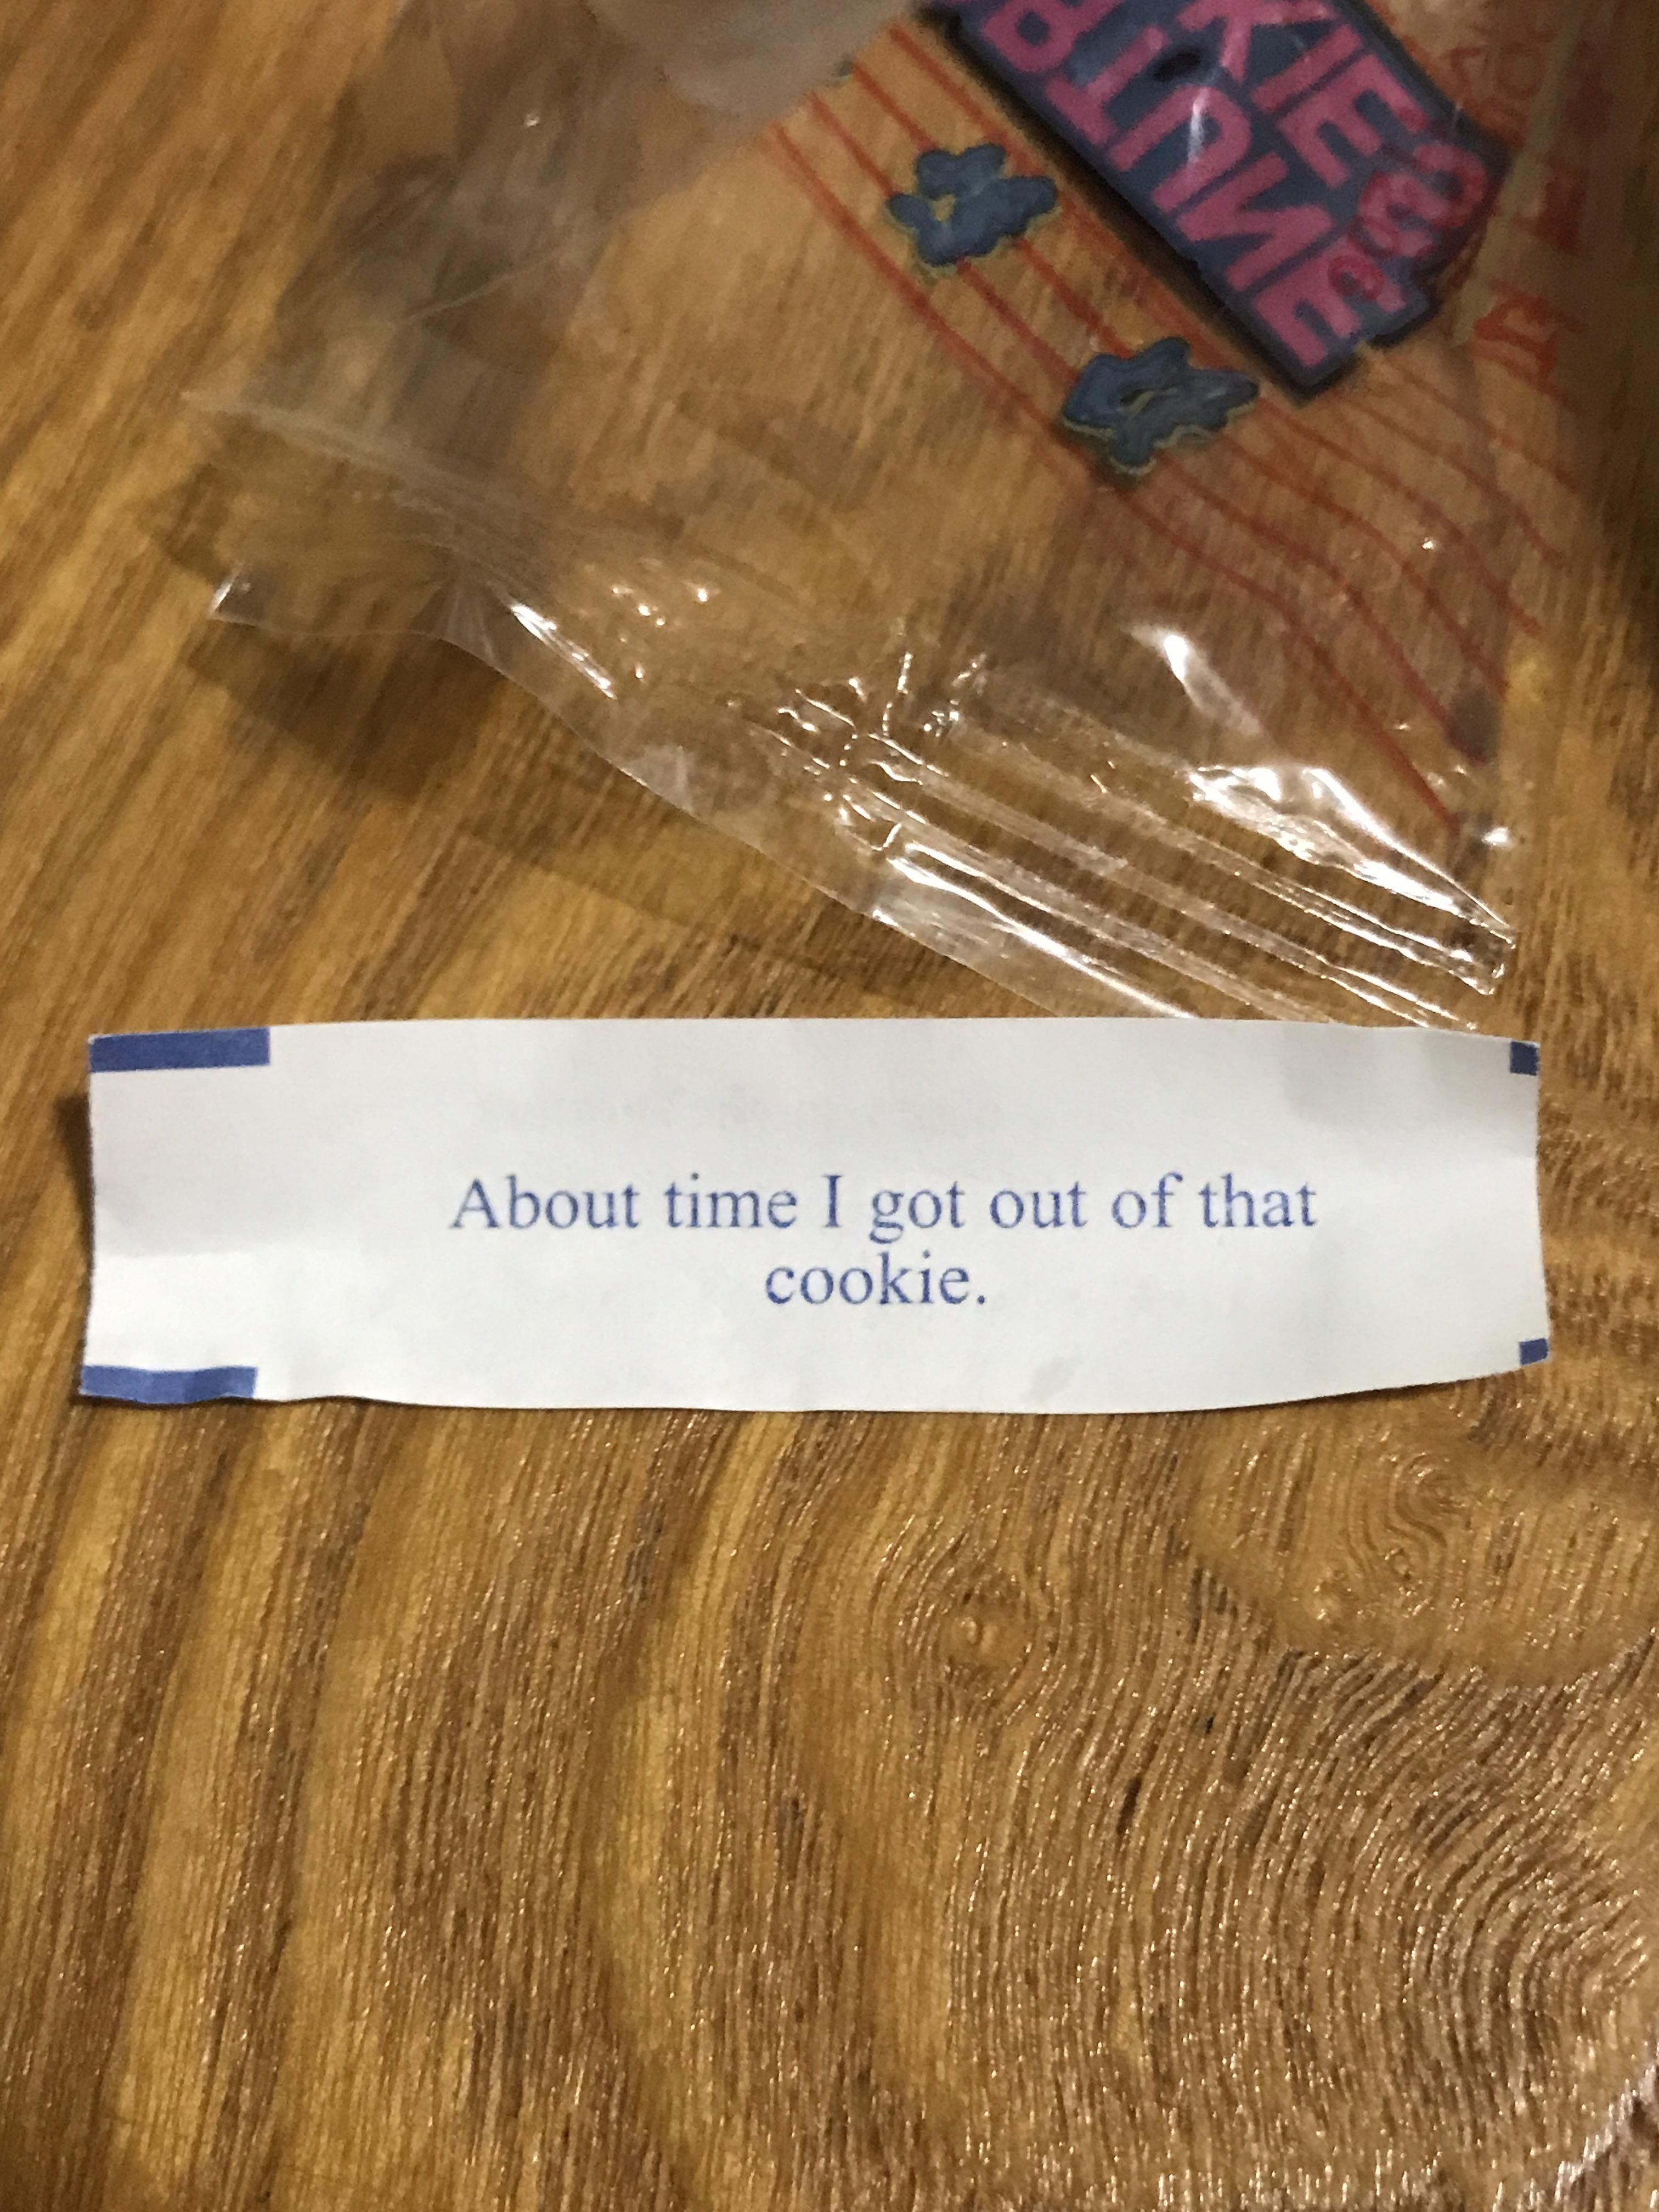 I just got a normal fortune cookie, but I did not expect that.